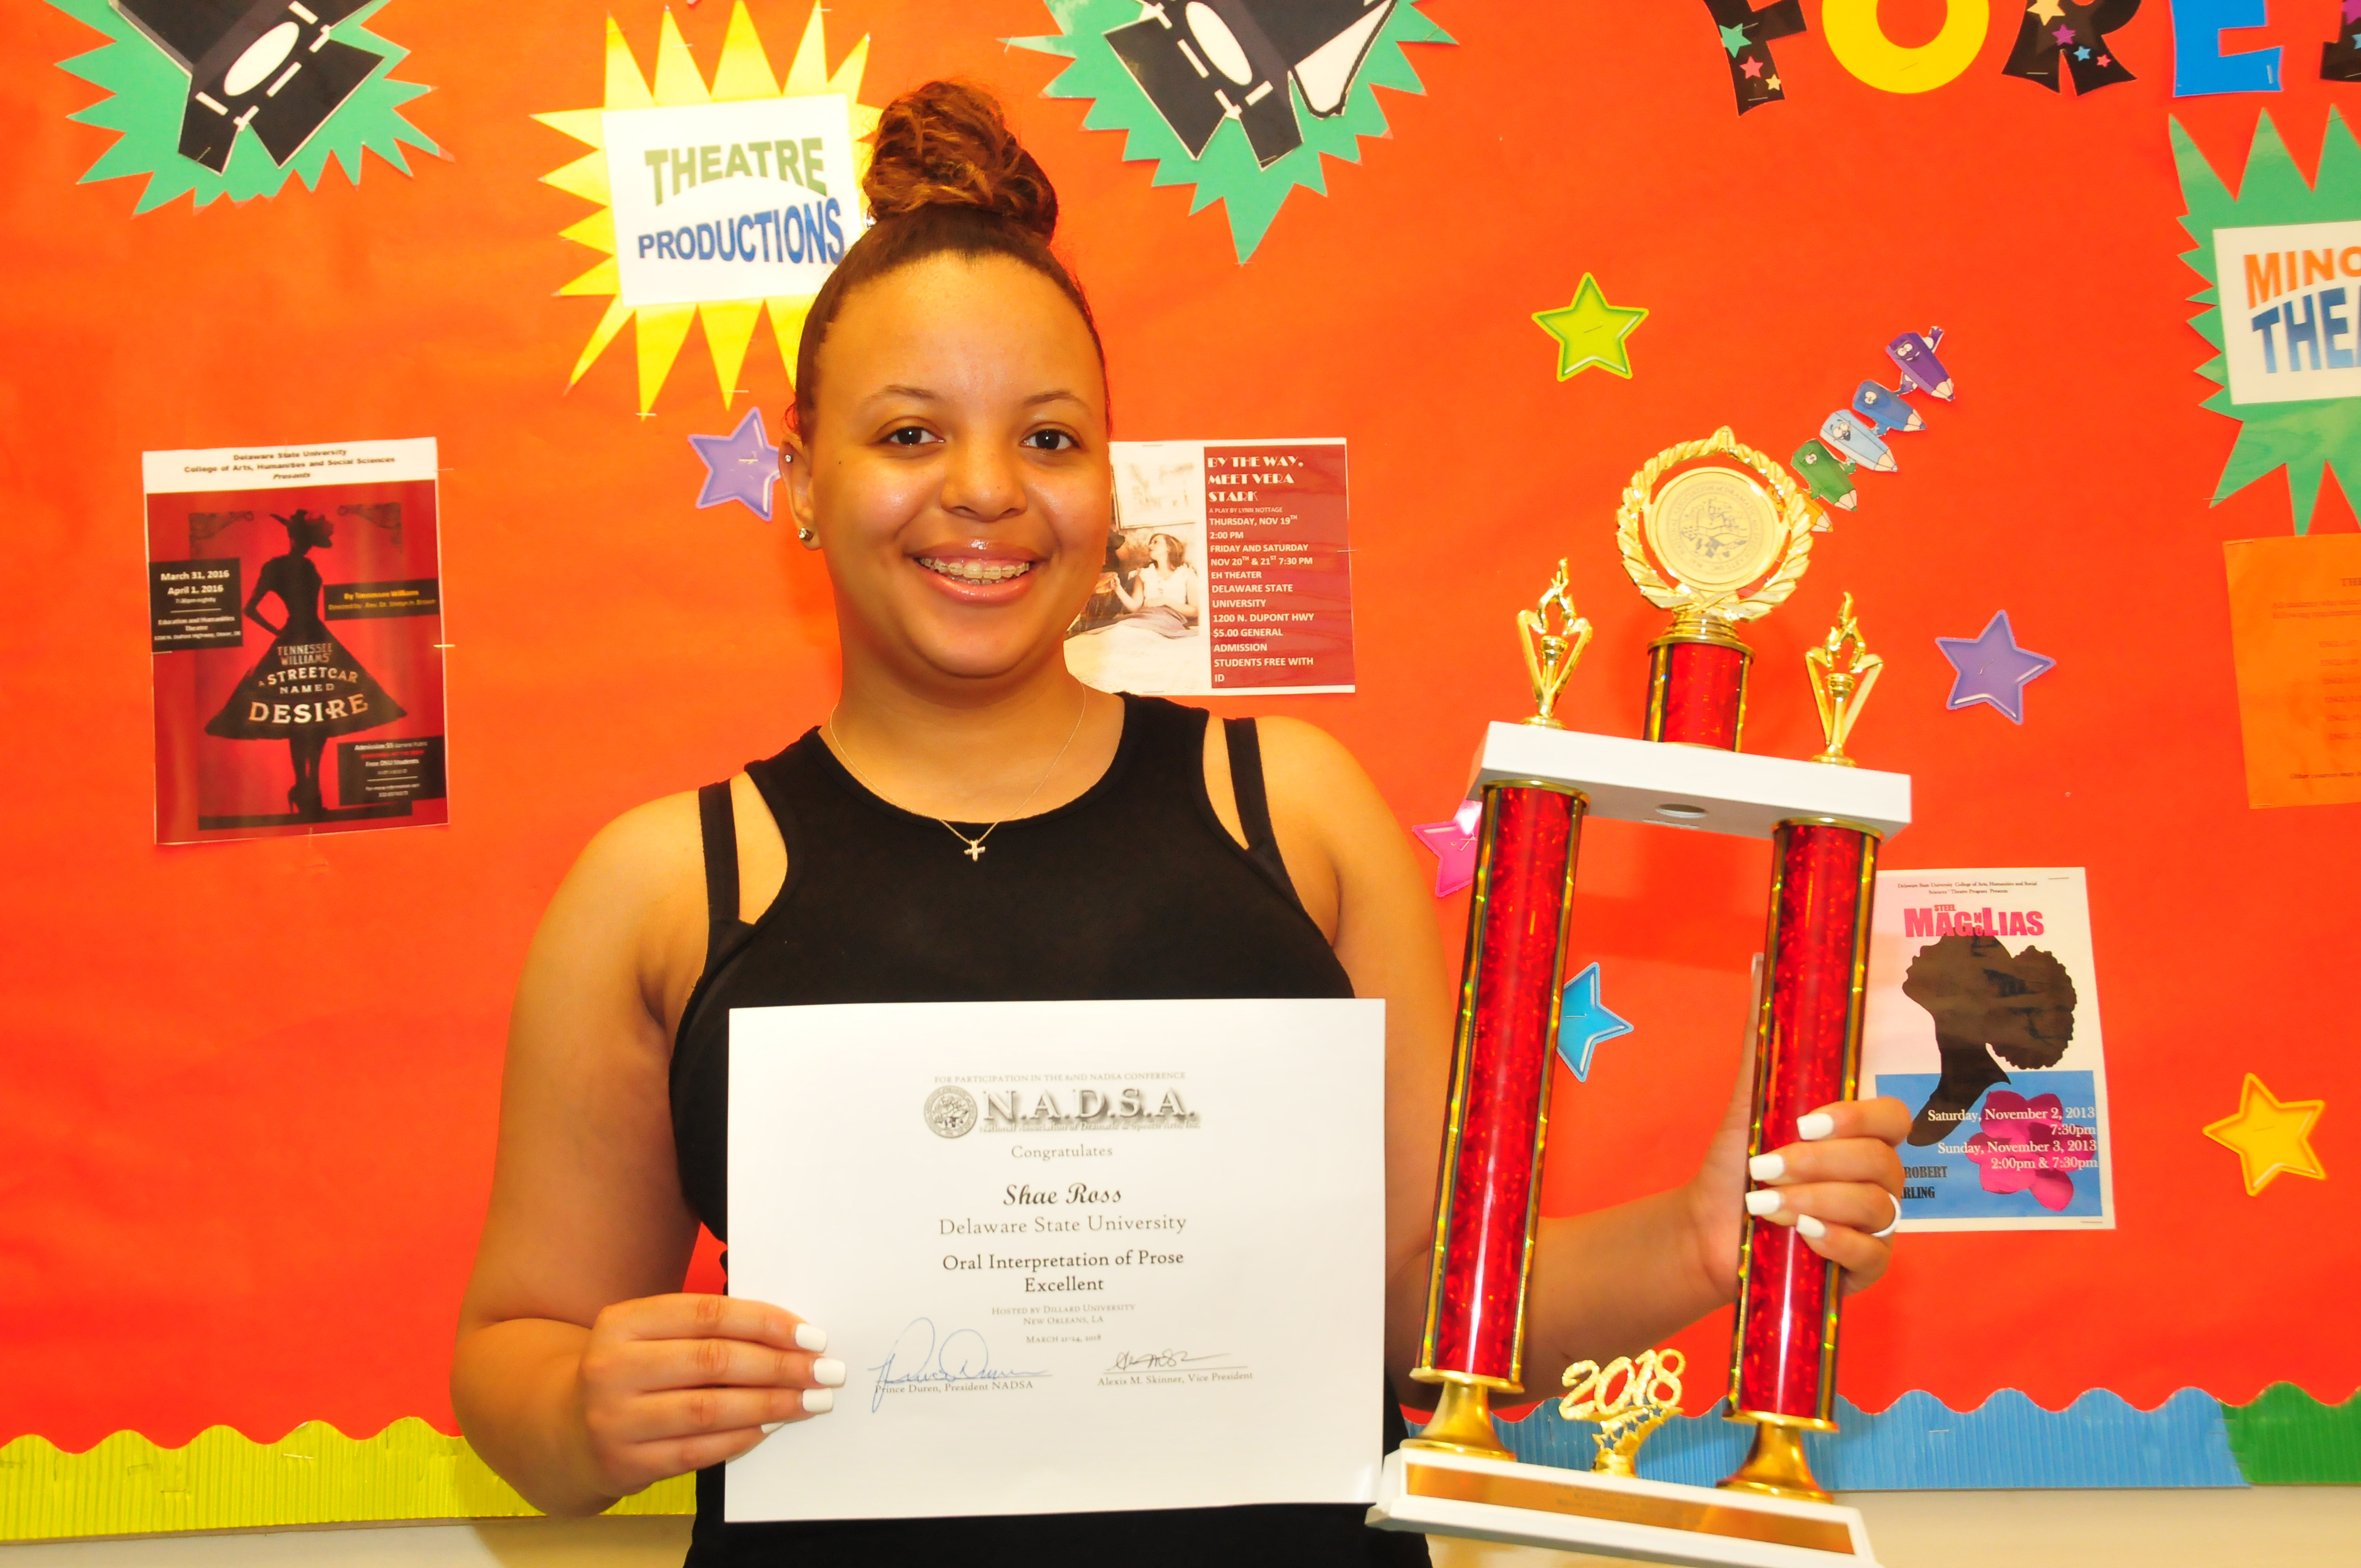 Sháe Ross won second place at the recent National Association of Dramatic and Speech Arts competition held at Dillard University in New Orleans, La.